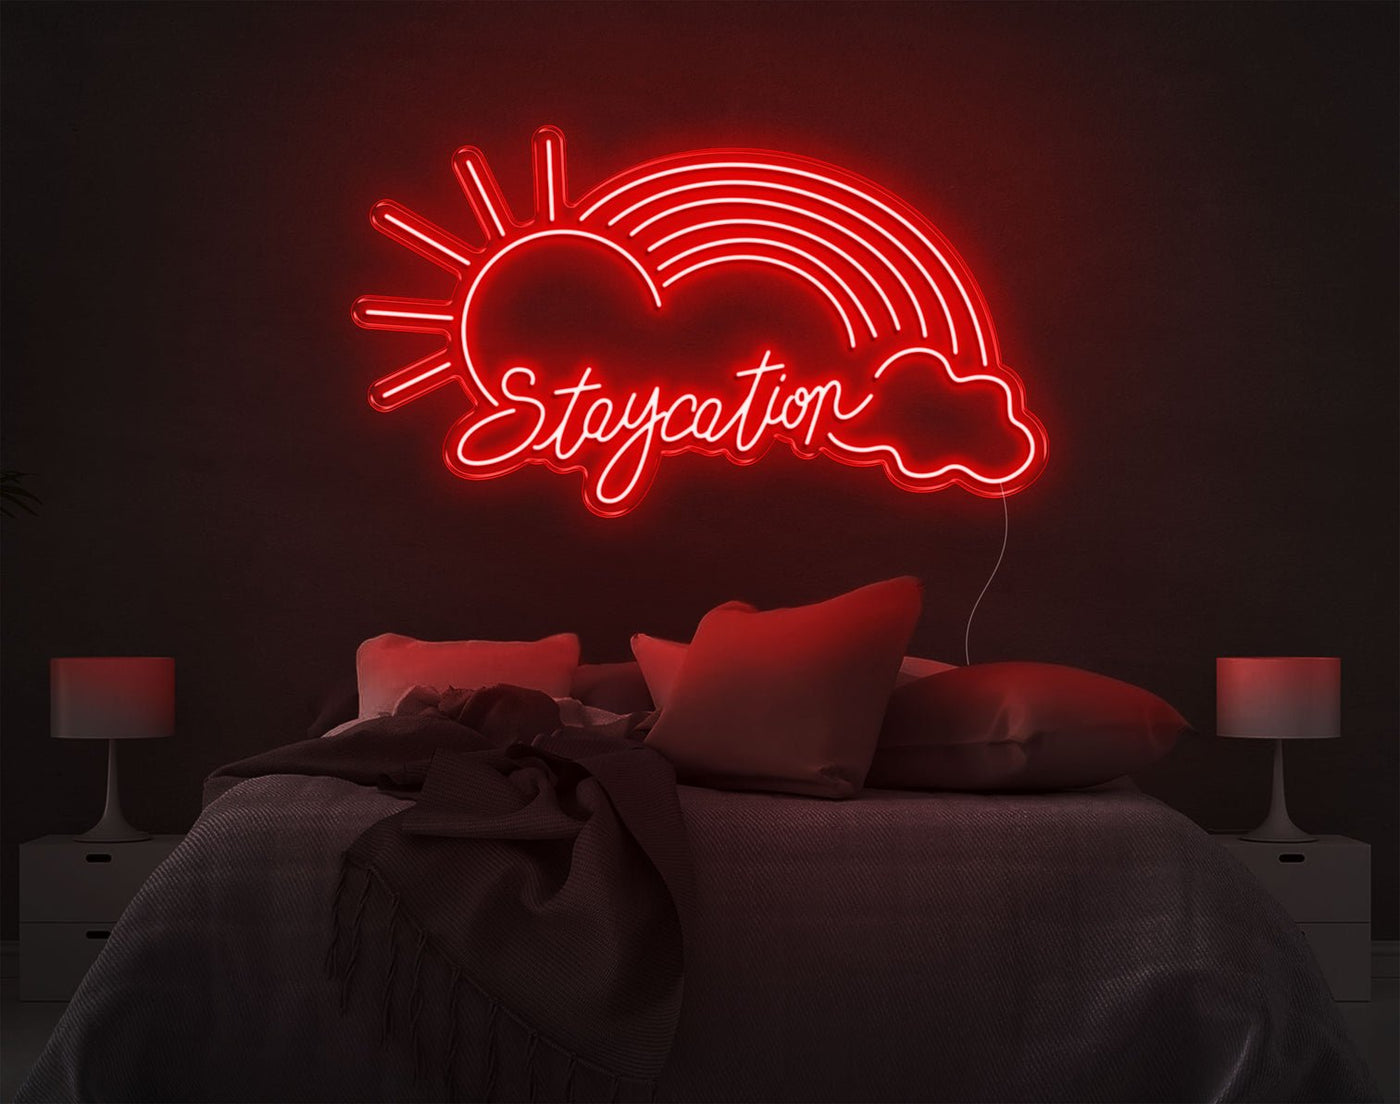 Staycation Rainbow LED Neon Sign - 23inch x 41inchRed